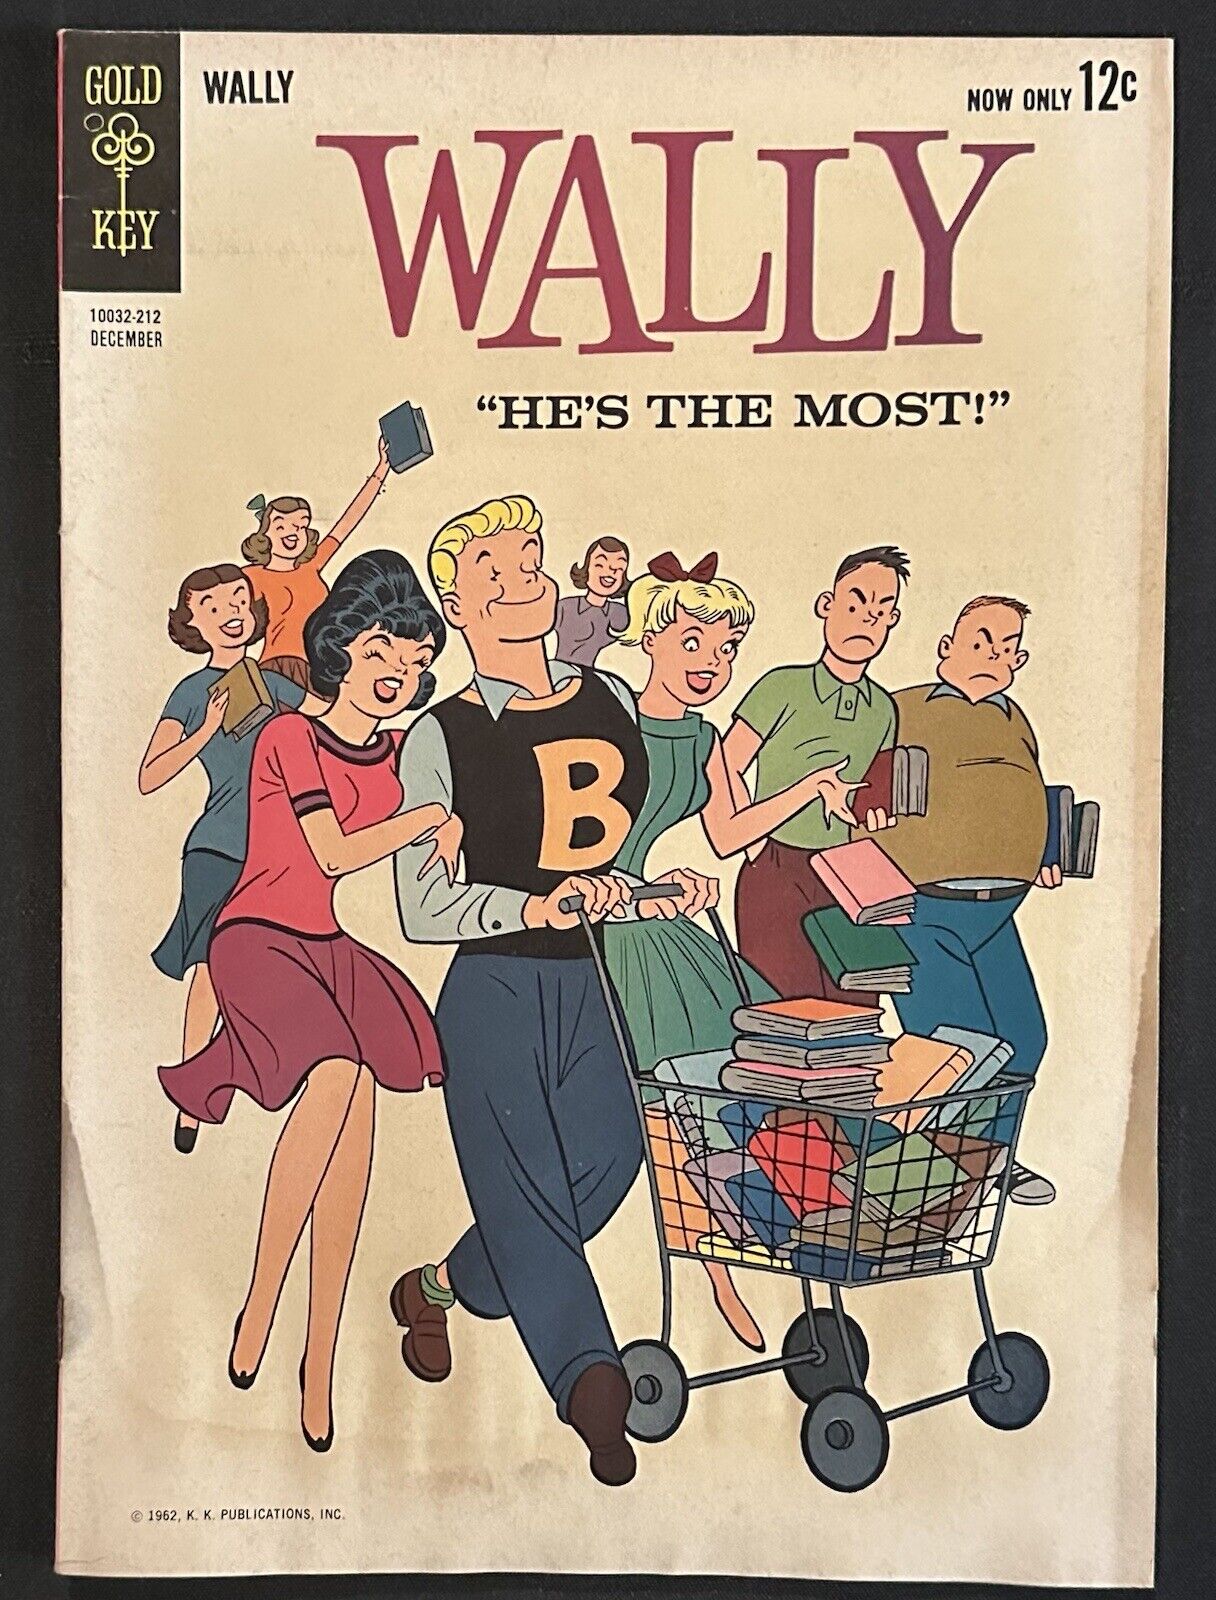 Wally “He’s The Most” #1 Gold Key Comics December 1963 Silver Age